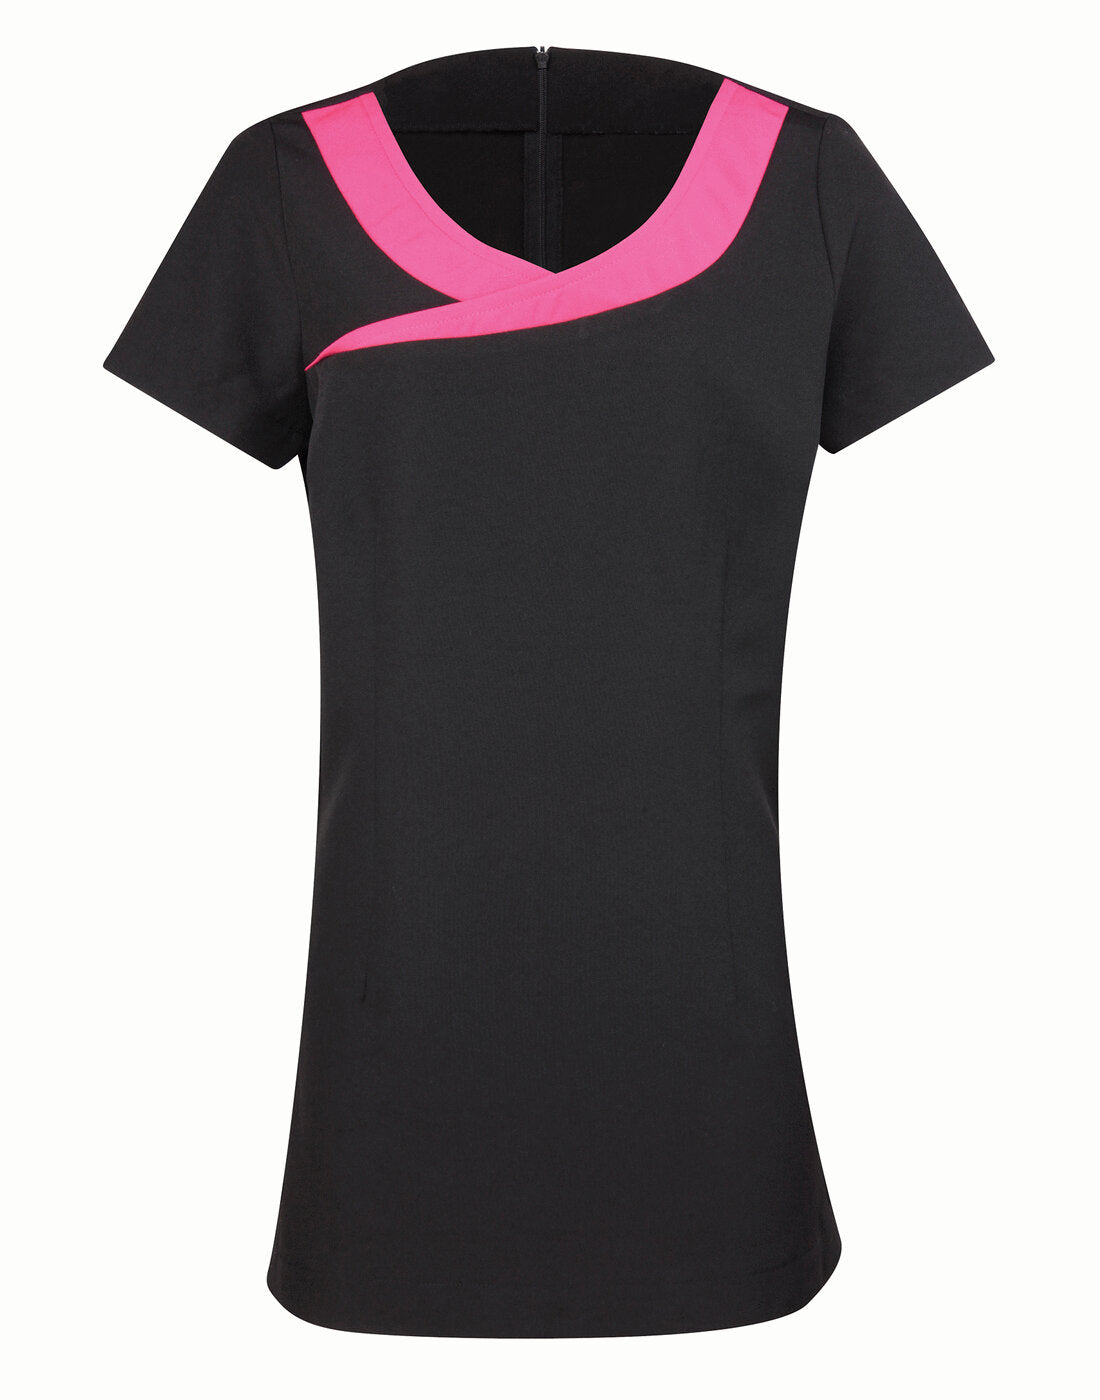 Premier 'Ivy' Beauty and Spa Tunic